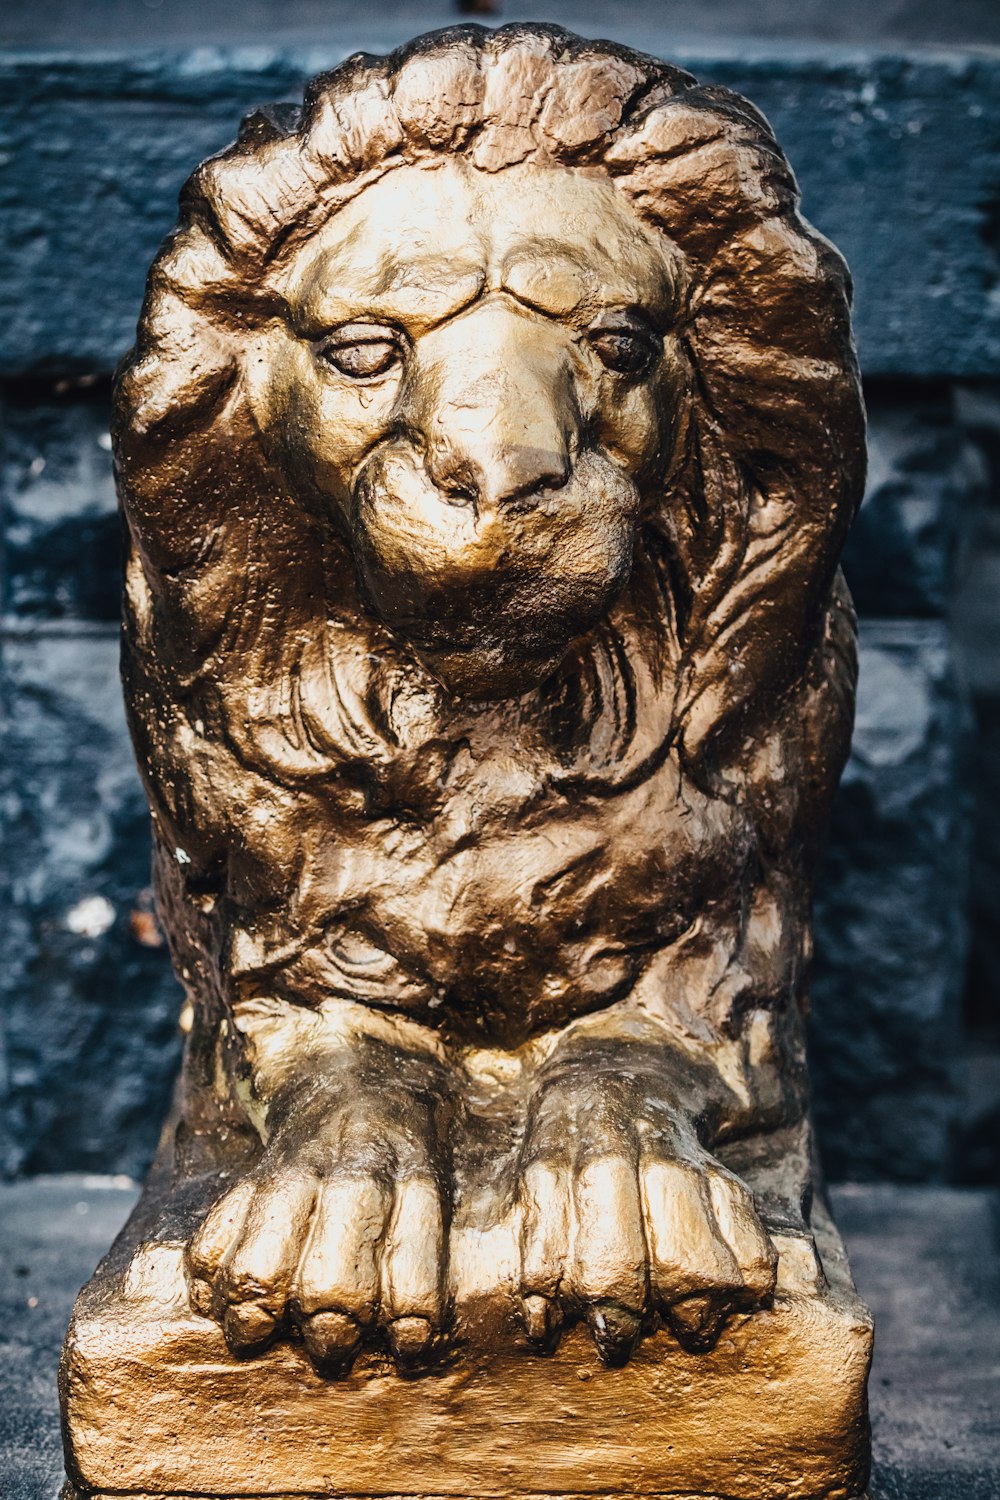 a statue of a lion sitting on top of a wooden block